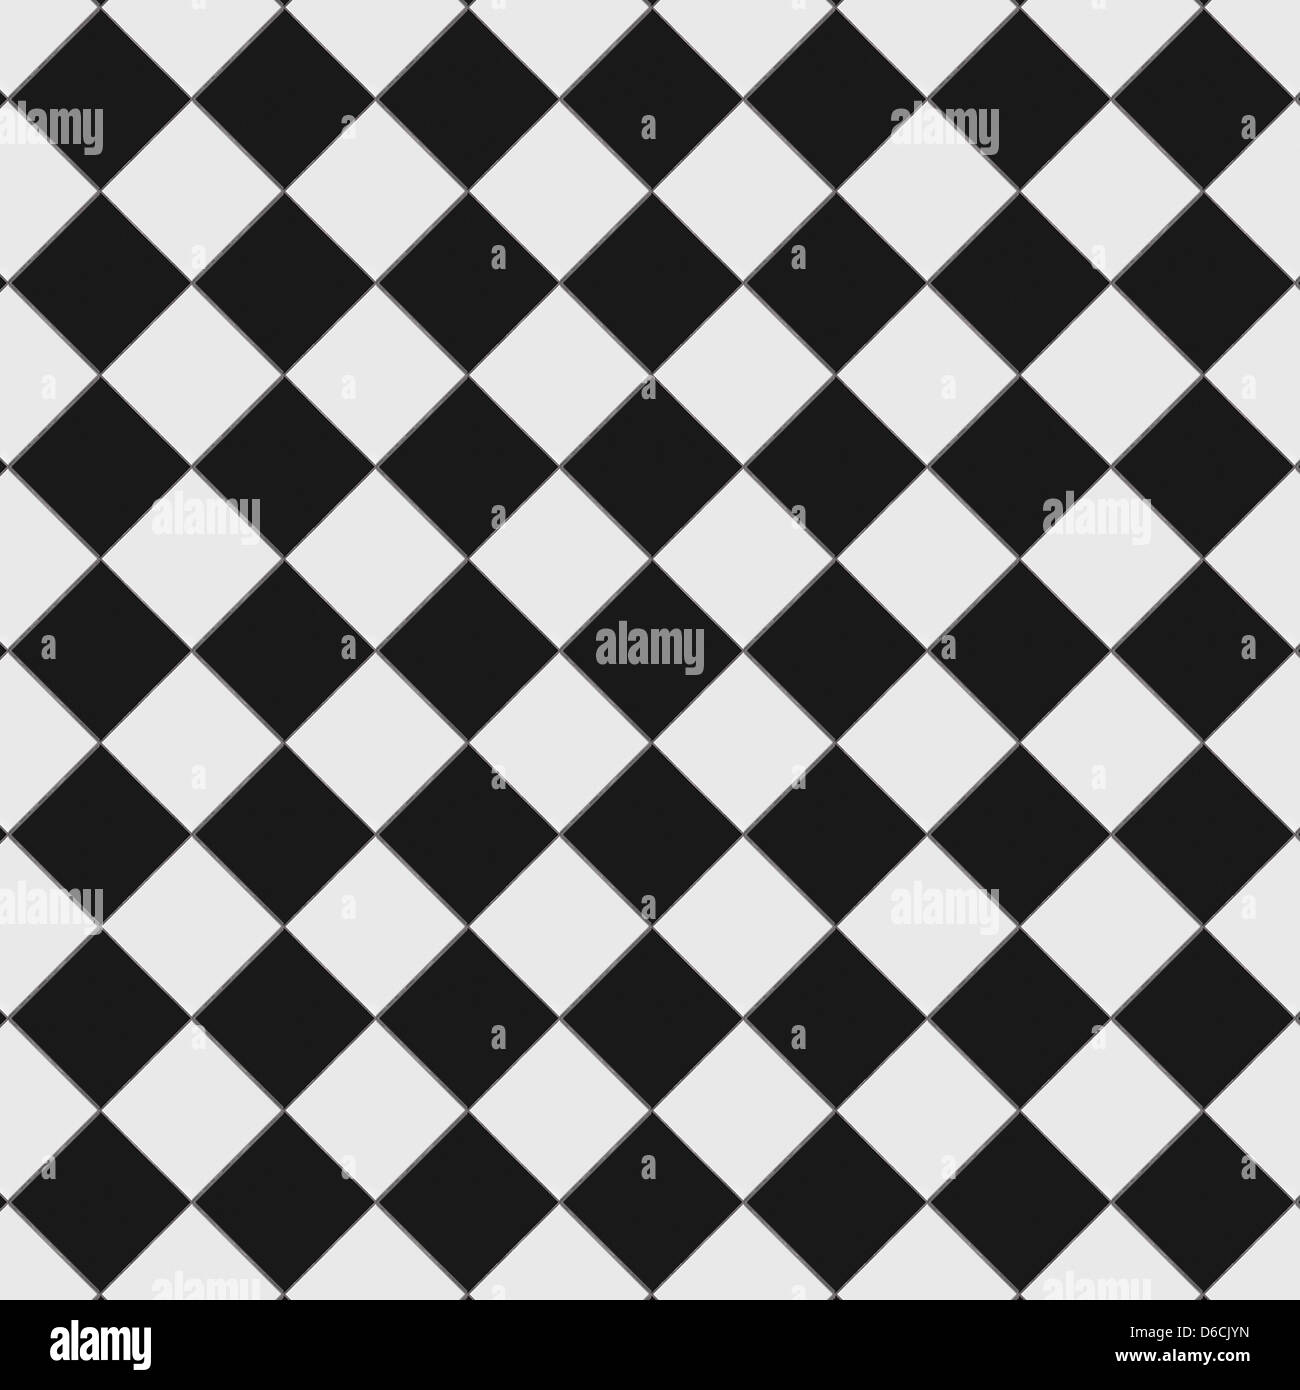 Black And White Checkered Floor Tiles With Texture This Tiles